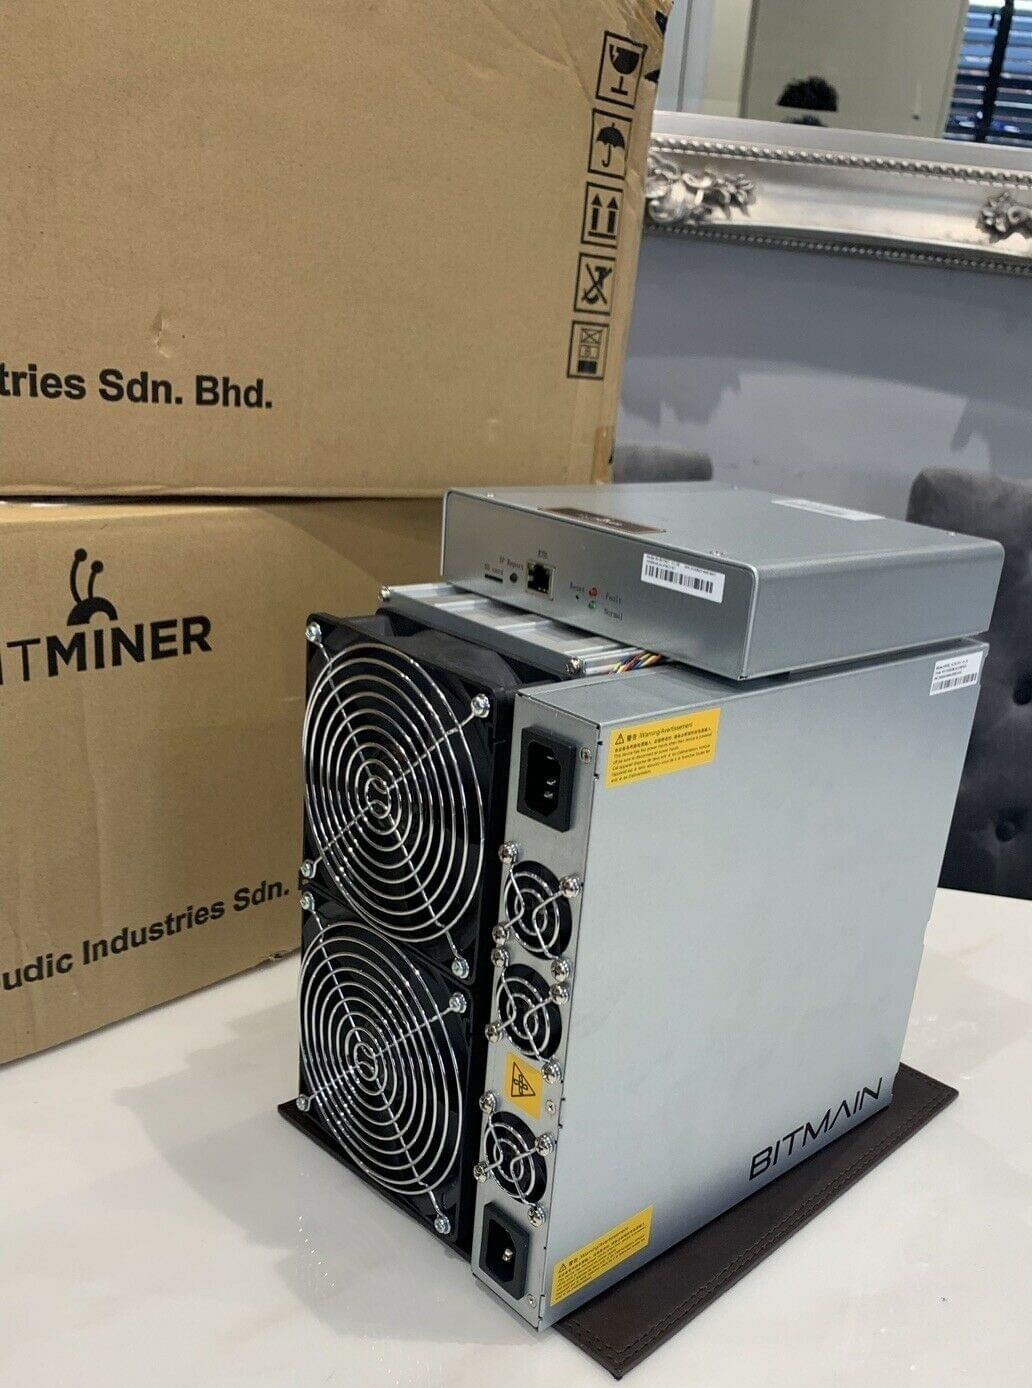 Antminer t21 190 th s. Antminer s19 Pro 110th. Bitmain Antminer s19j Pro. Antminer s19j Pro 104. Antminer s19j Pro Pro 104th.